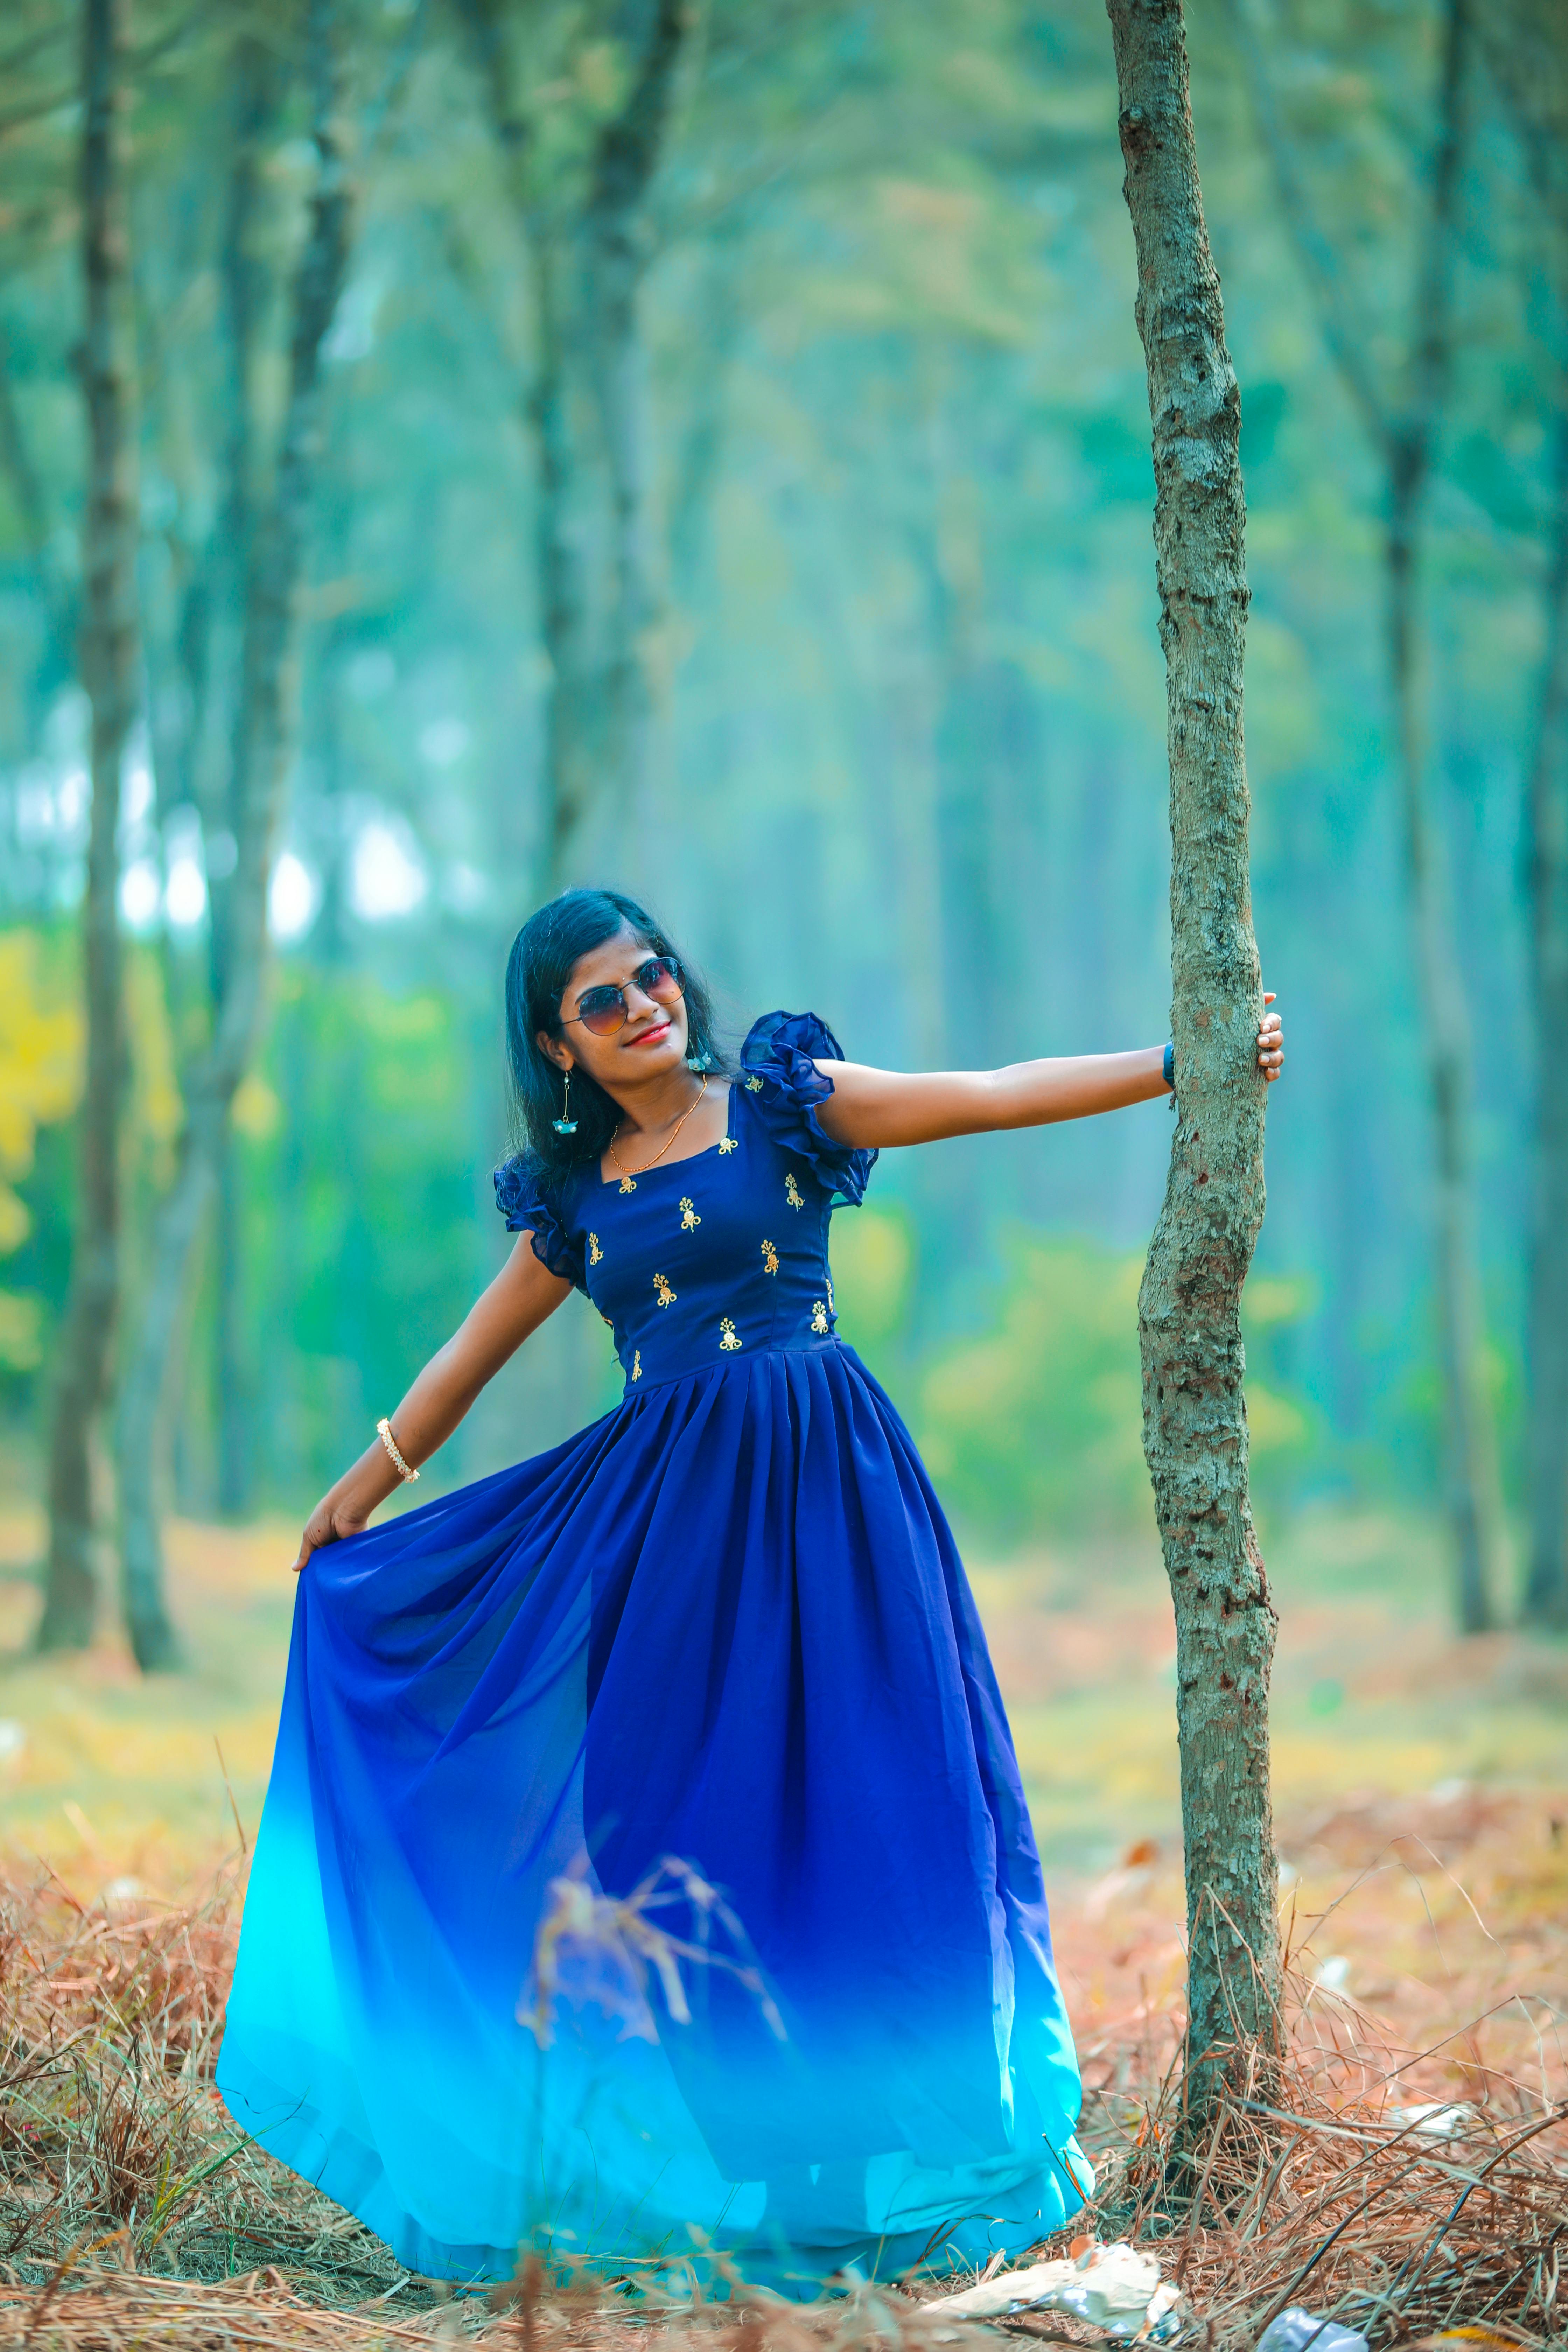 Outdoor photoshoot in gown | Gowns, Long frocks, Outdoor photoshoot